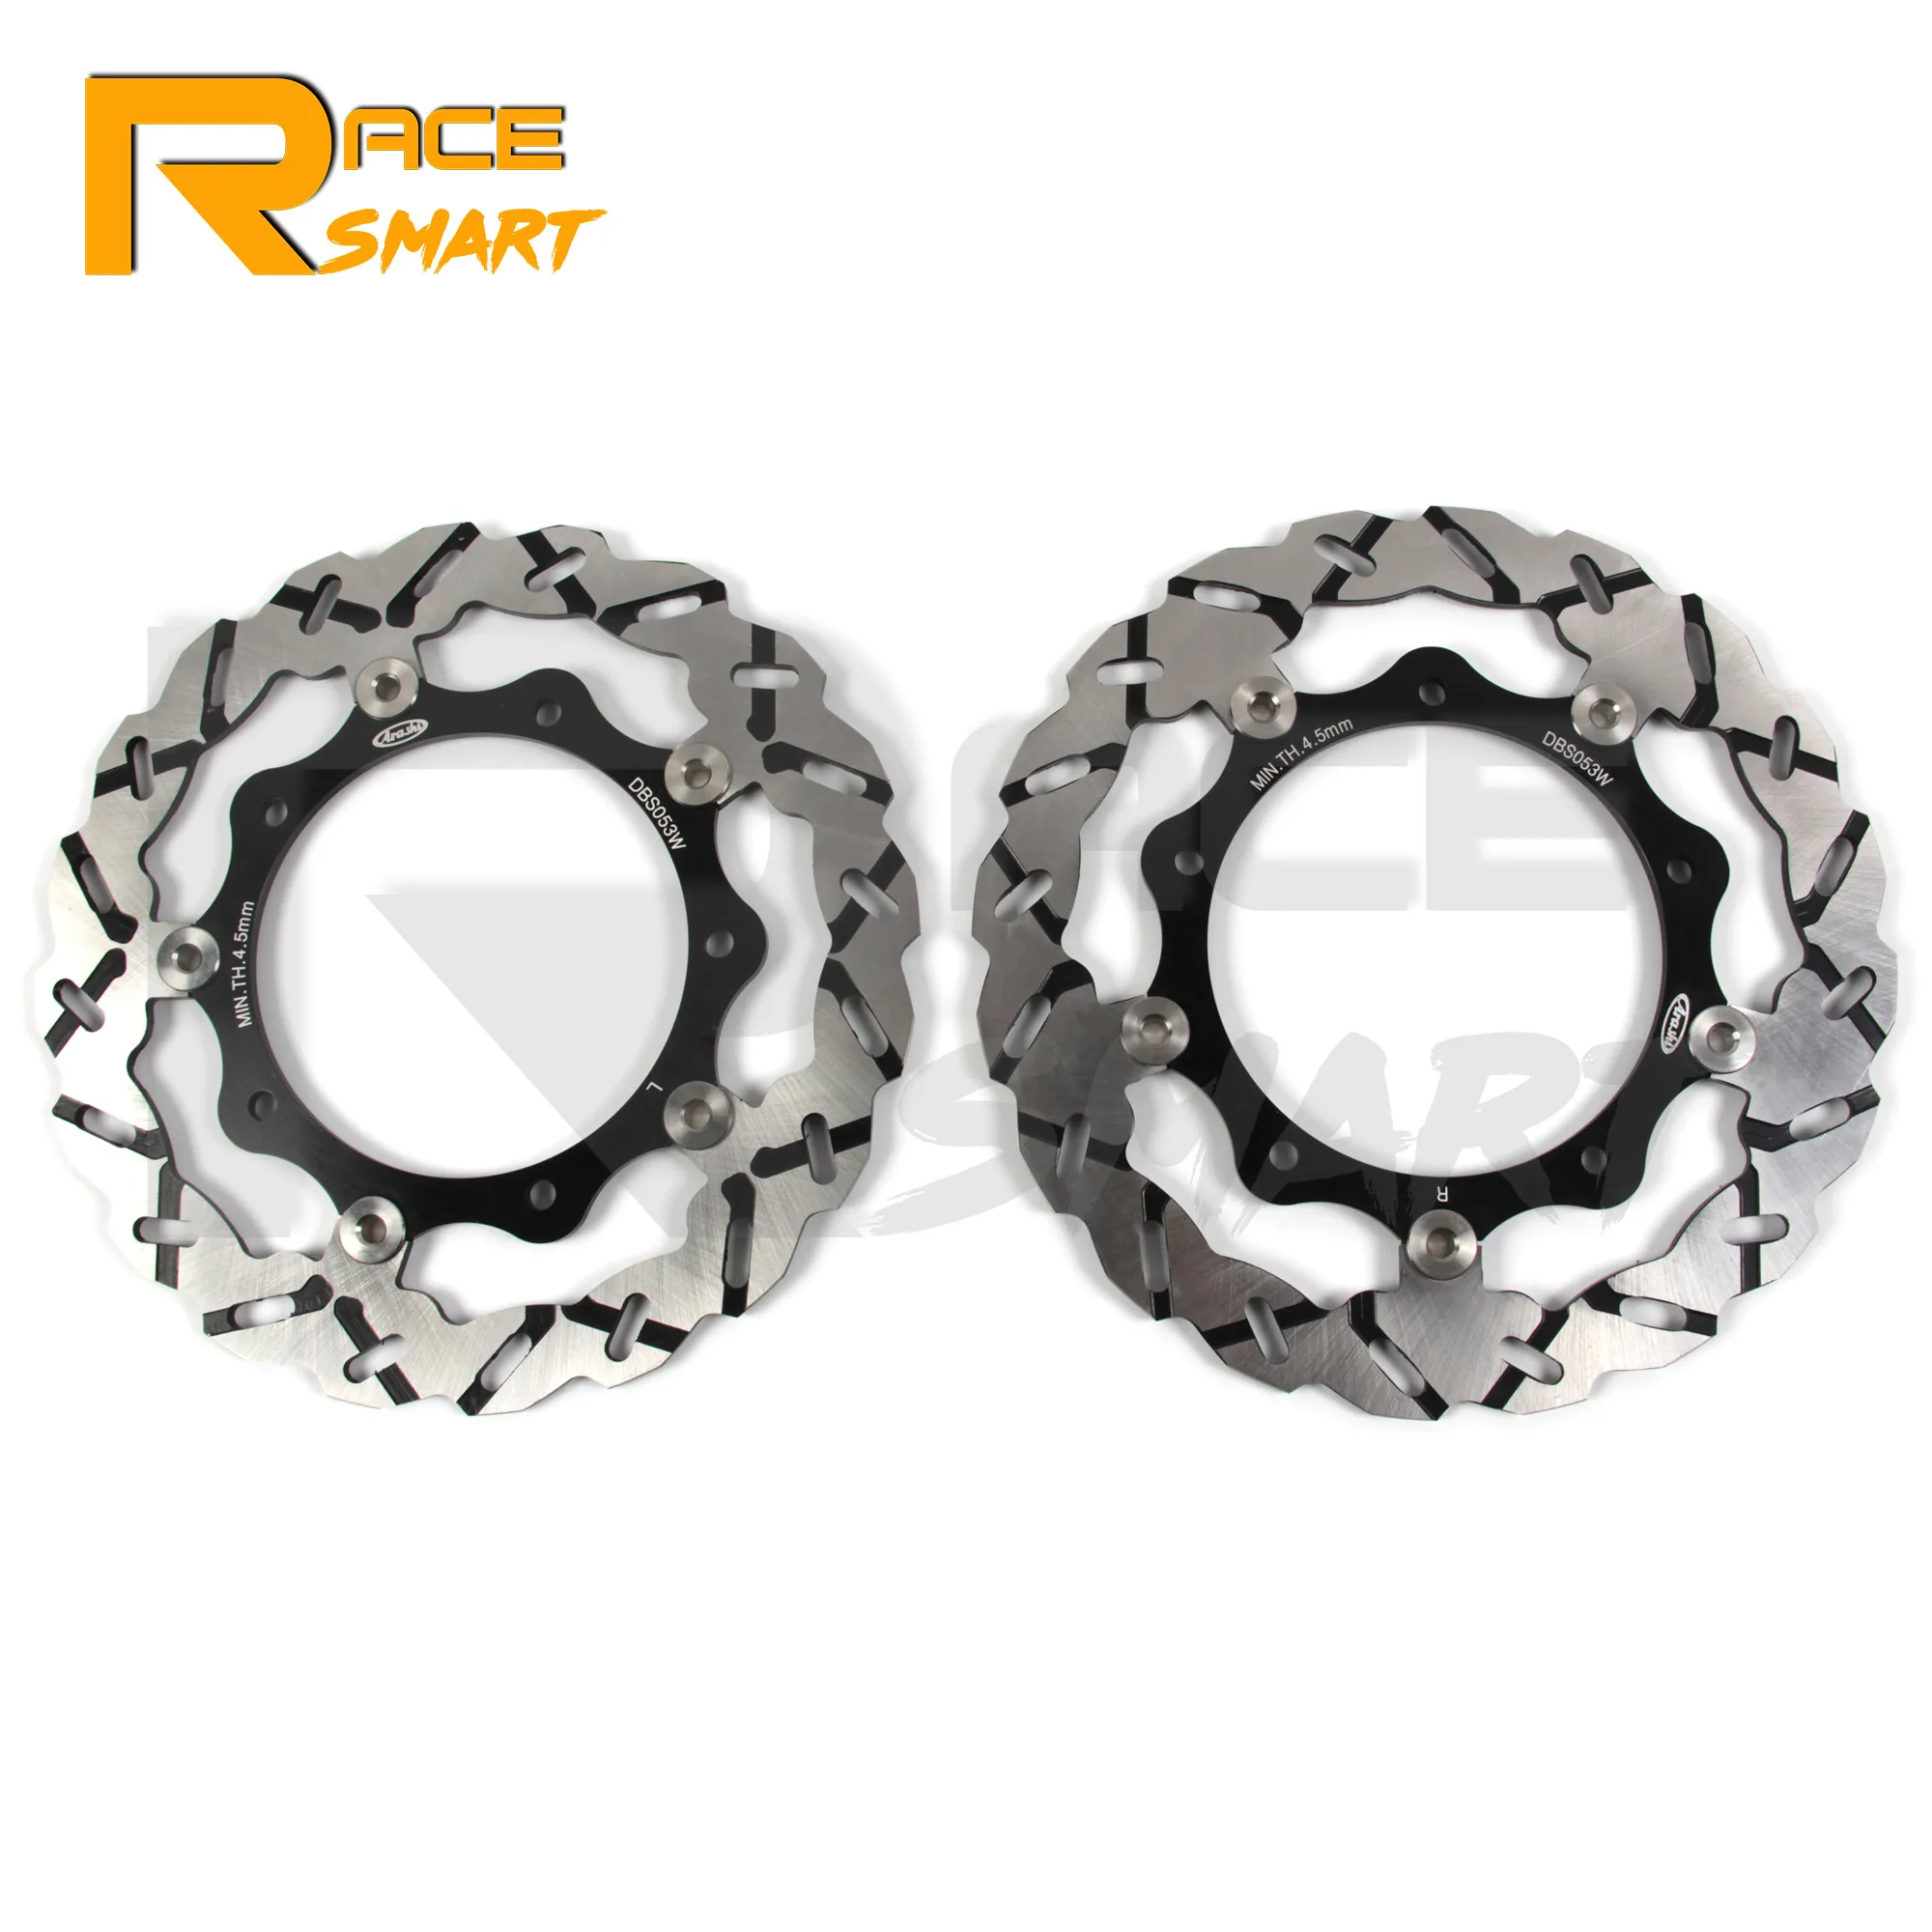 

267mm Motorcycle CNC Front Brake Discs Rotors For YAMAHA XP T-MAX 530 IRON MAX ABS 2016 Brake Disk XP530 T-max LUX Max Abs 16